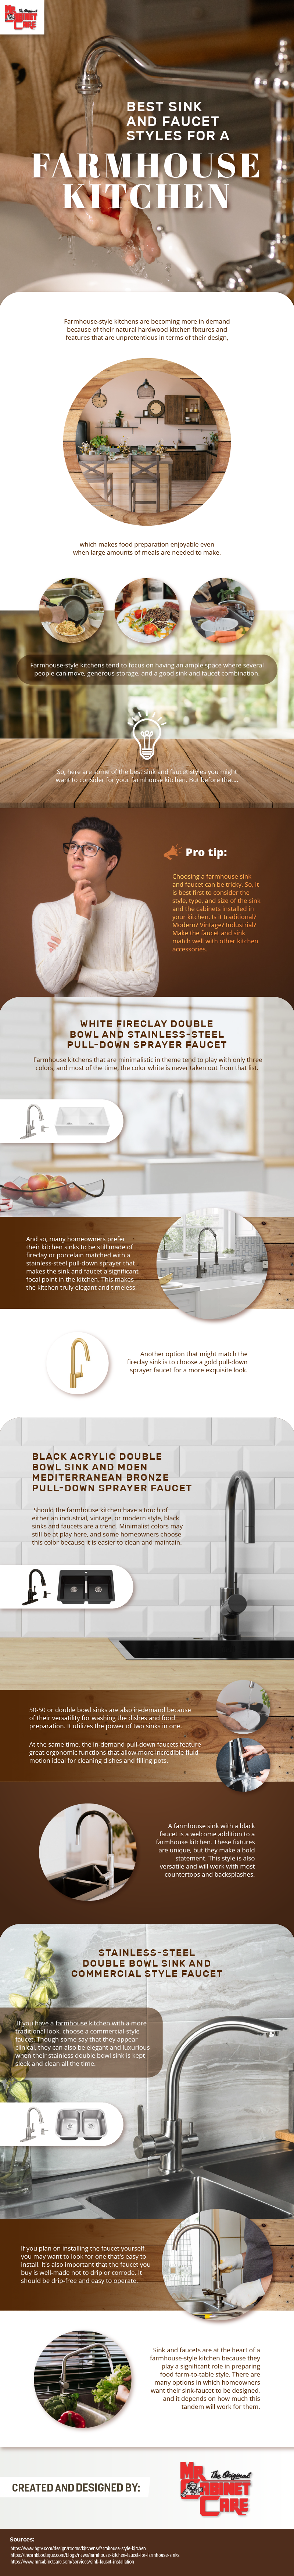 Best_Sink_and_Faucet_Styles_for_a_Farmhouse_Kitchen_infographic_image 